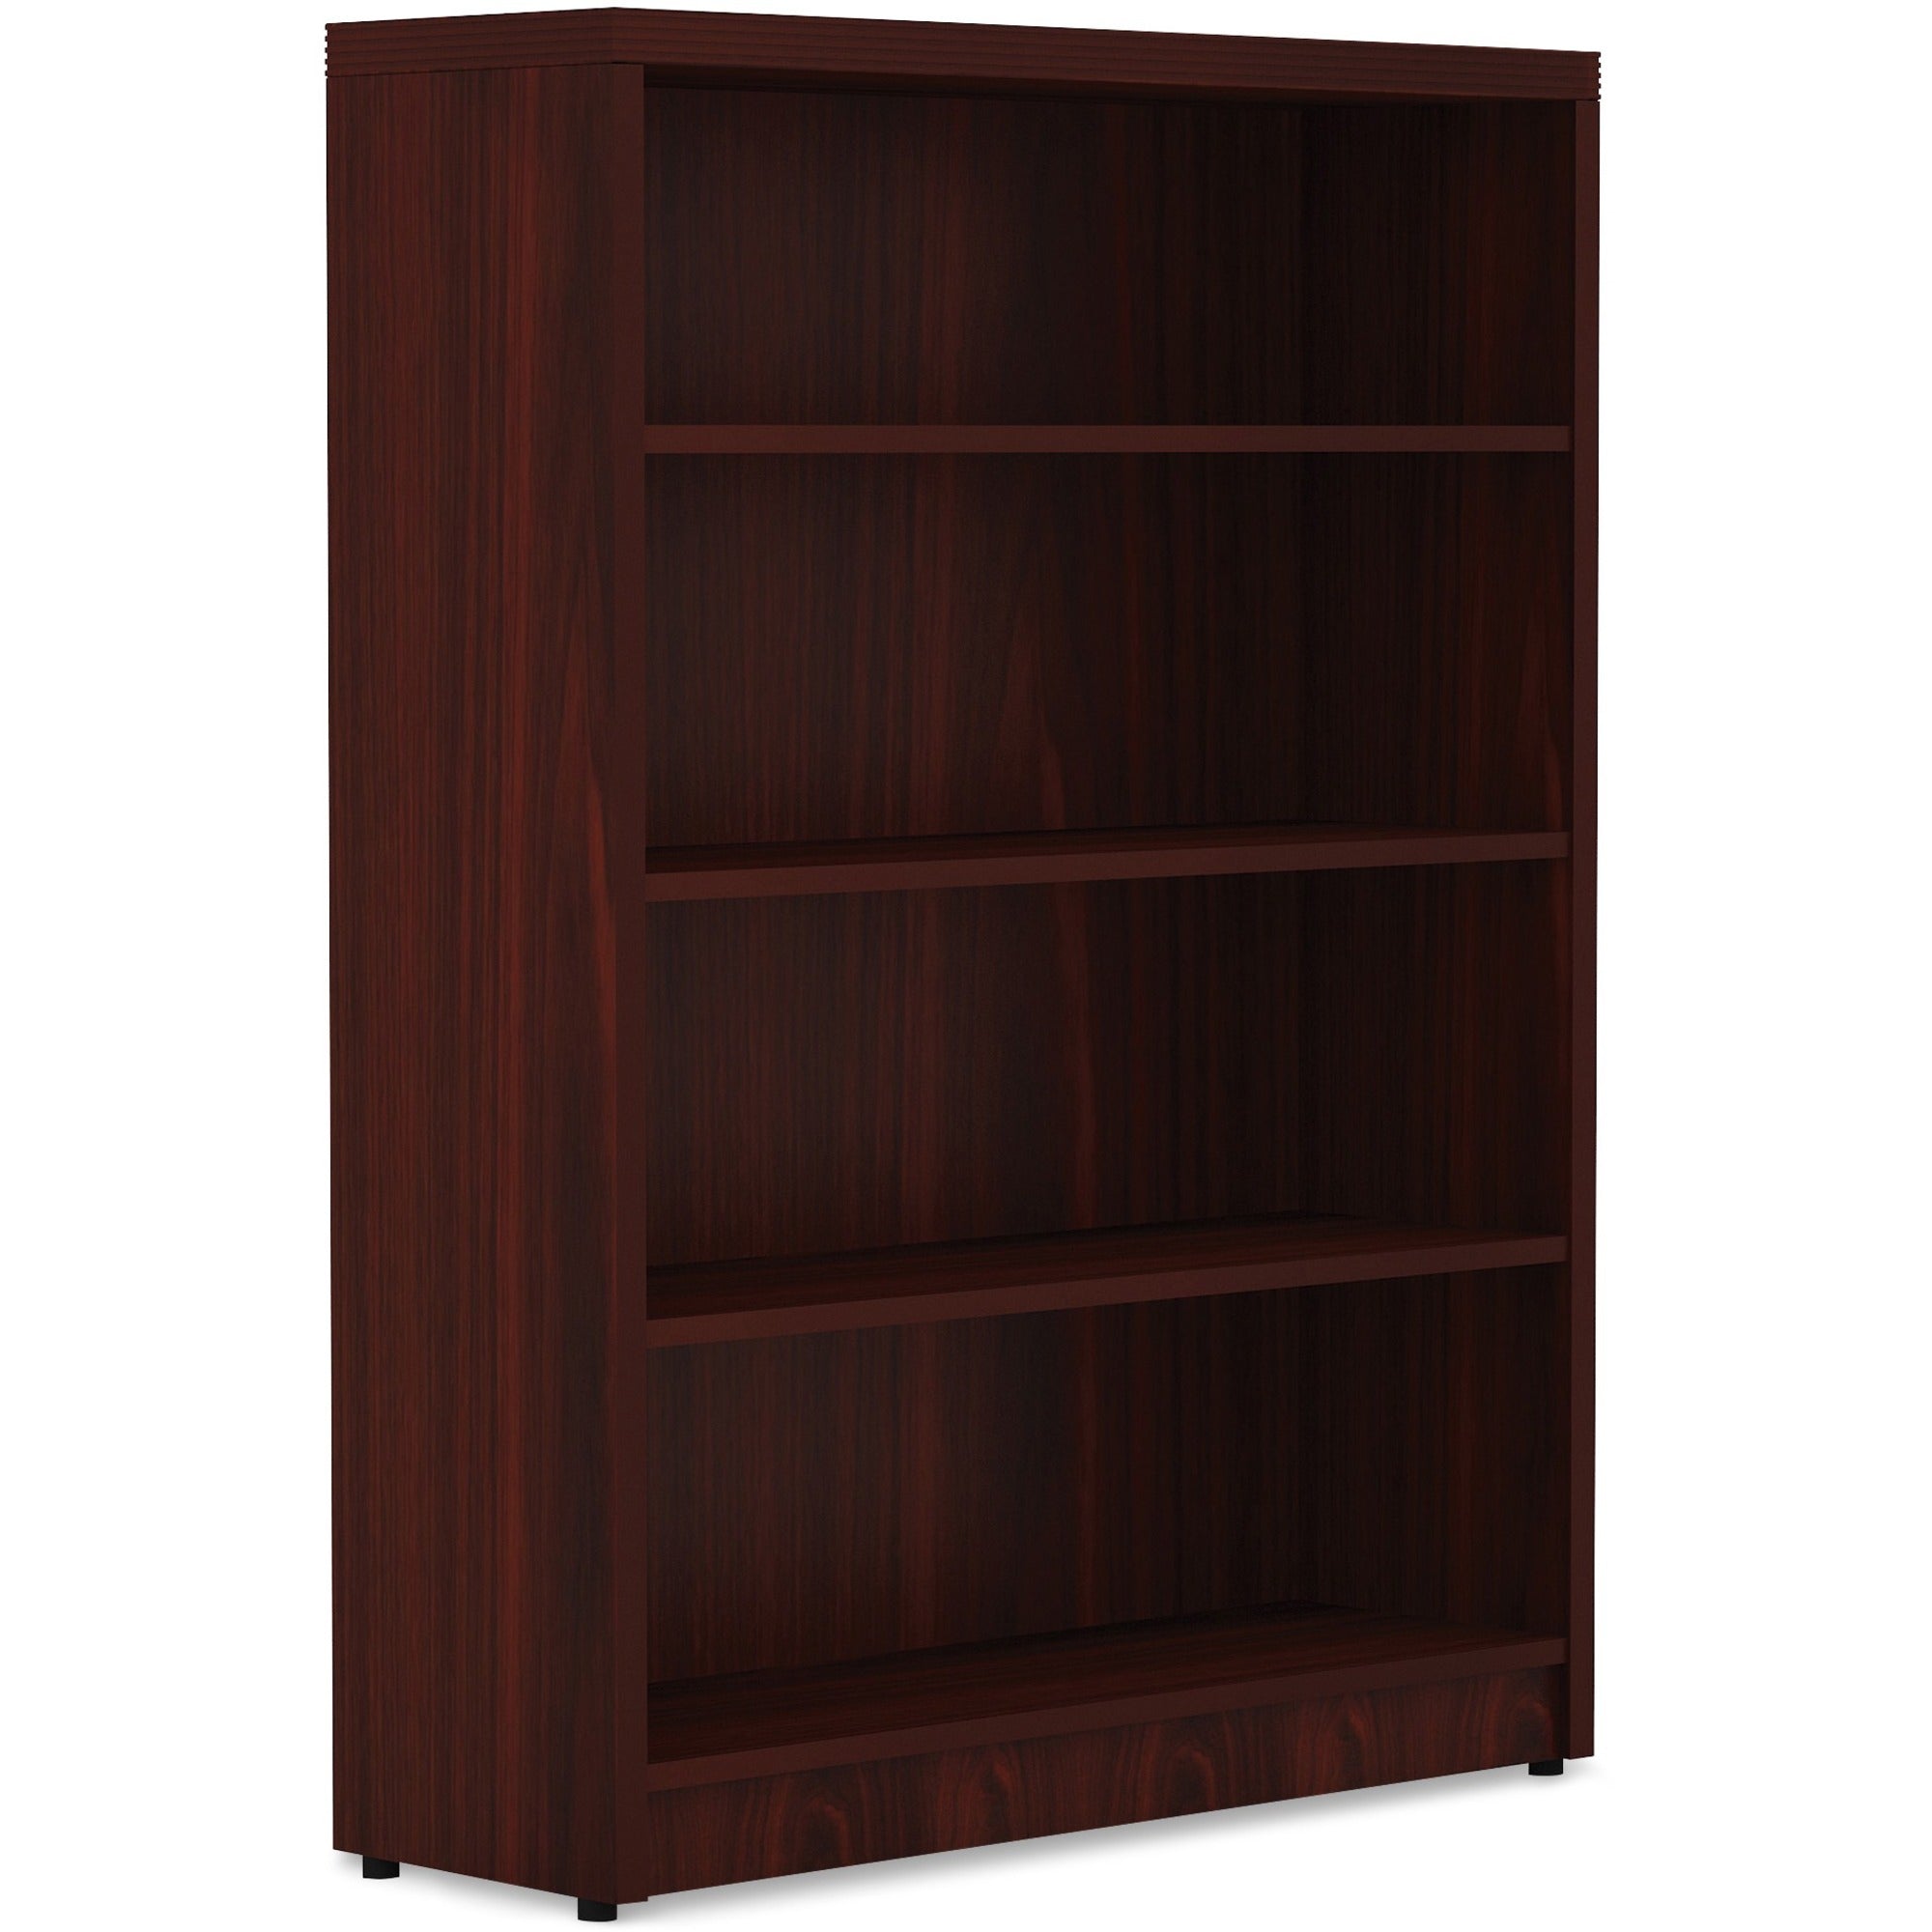 Lorell Chateau Series Bookshelf - 1.5" Top, 36" x 11.6"48.5" Bookshelf - 4 Shelve(s) - Reeded Edge - Material: P2 Particleboard - Finish: Mahogany - Durable, Sturdy - For Office, Book - 